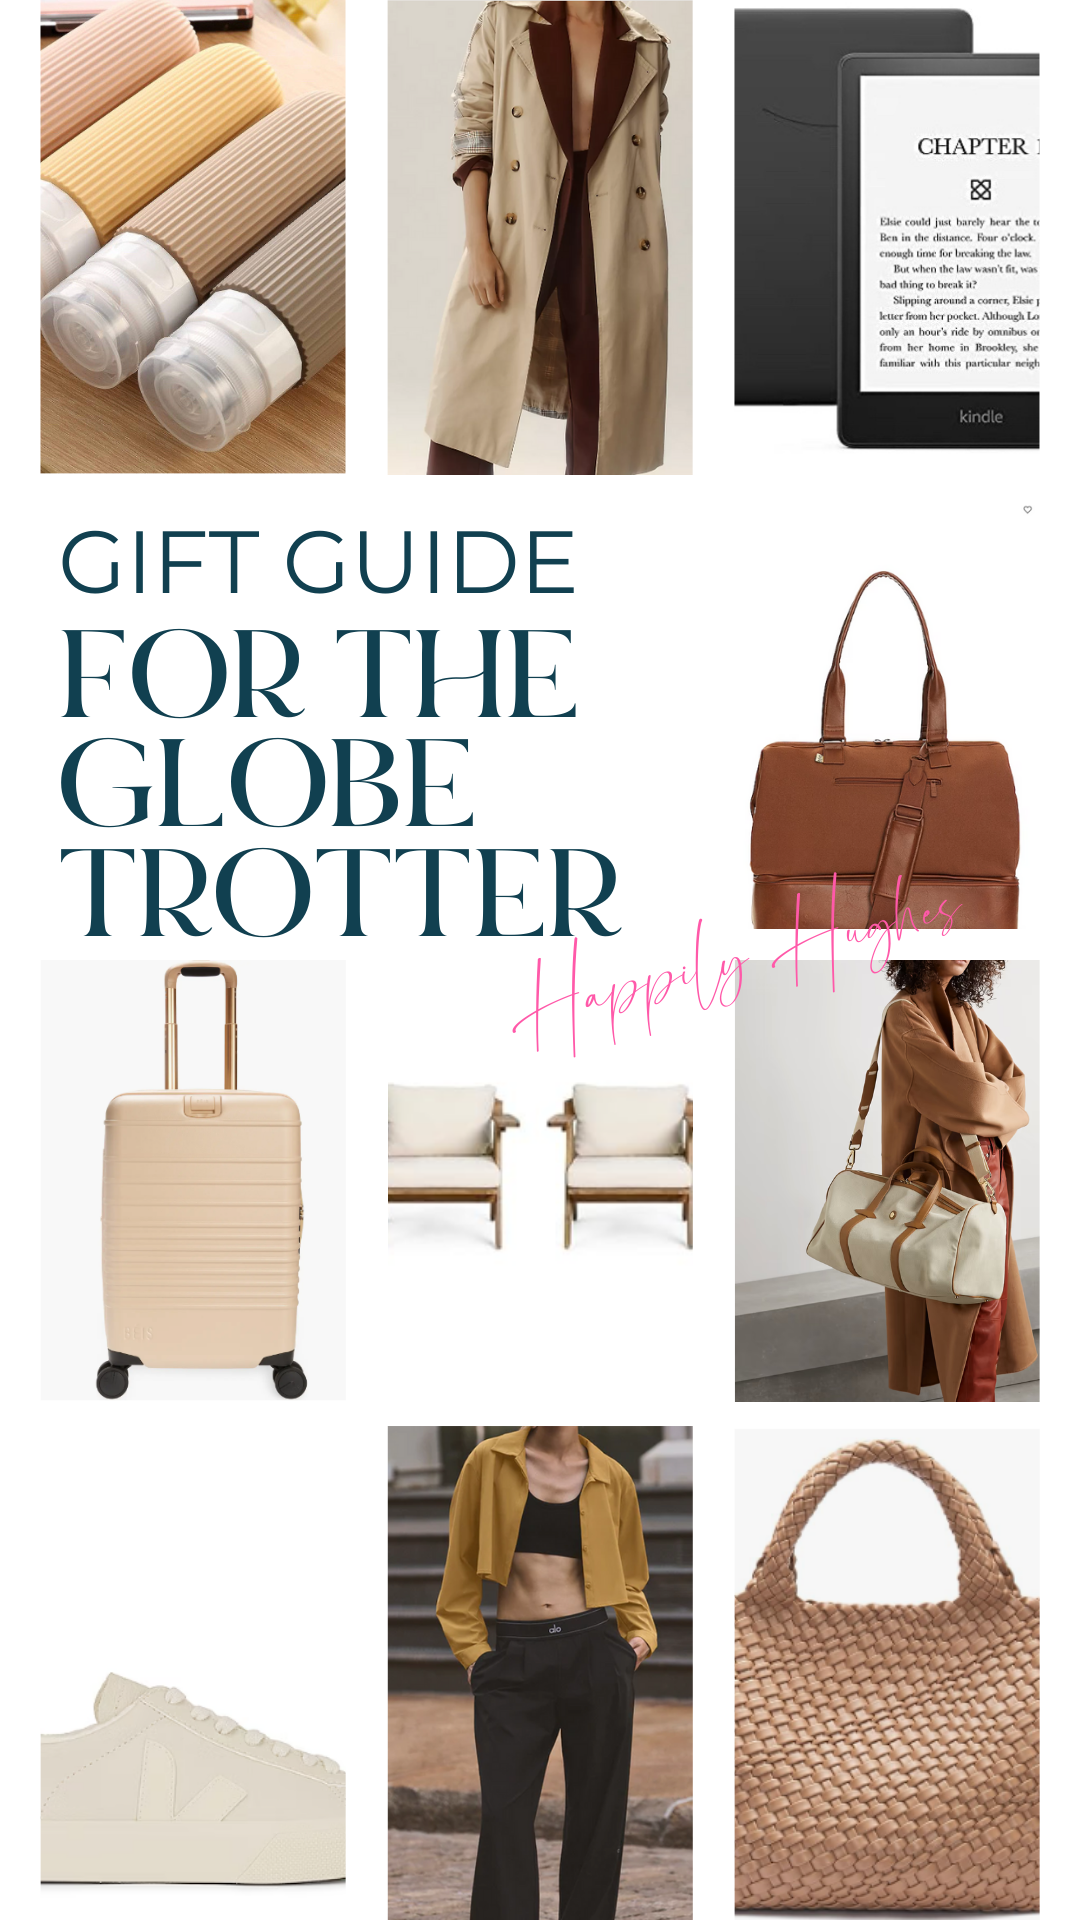 Holiday Gift Guide items for the Globe Trotter